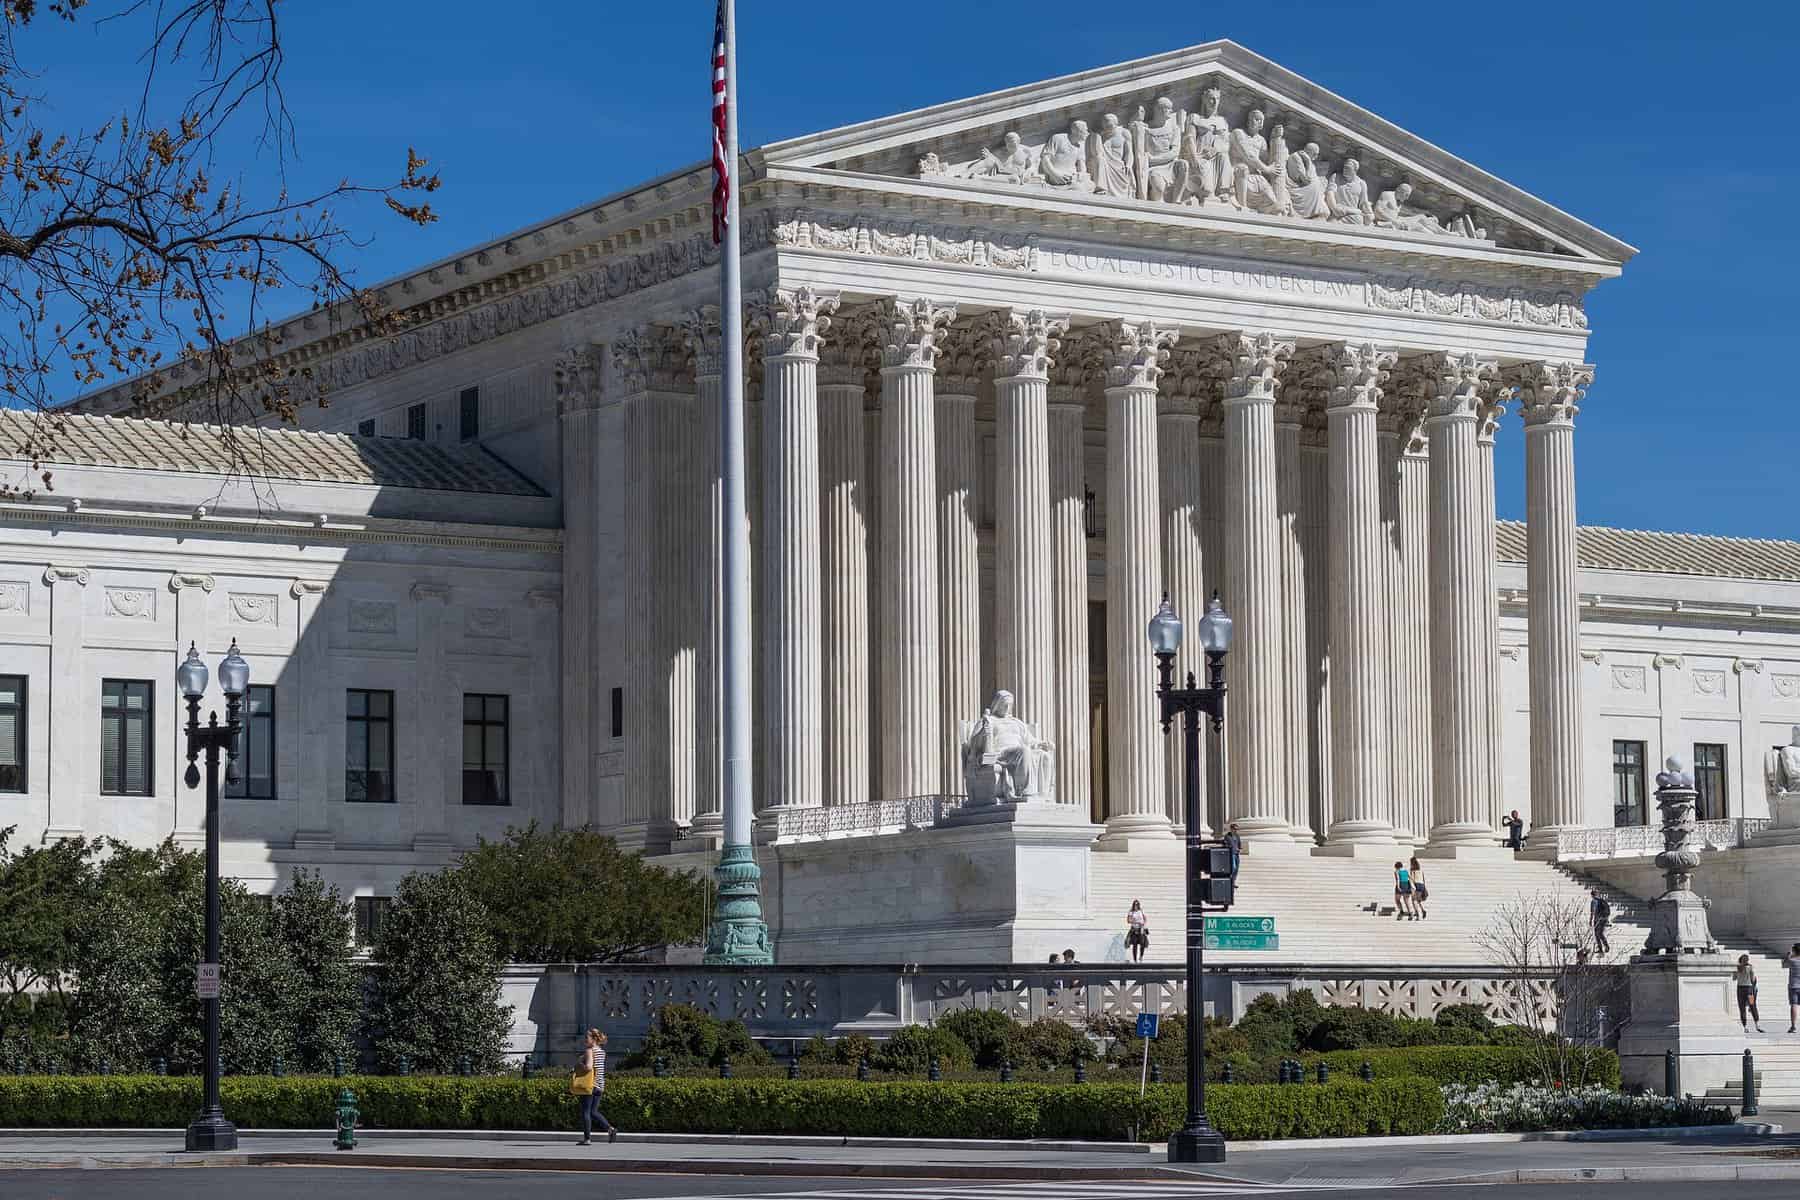 The facade of the Supreme court is seen at an angle from the street.